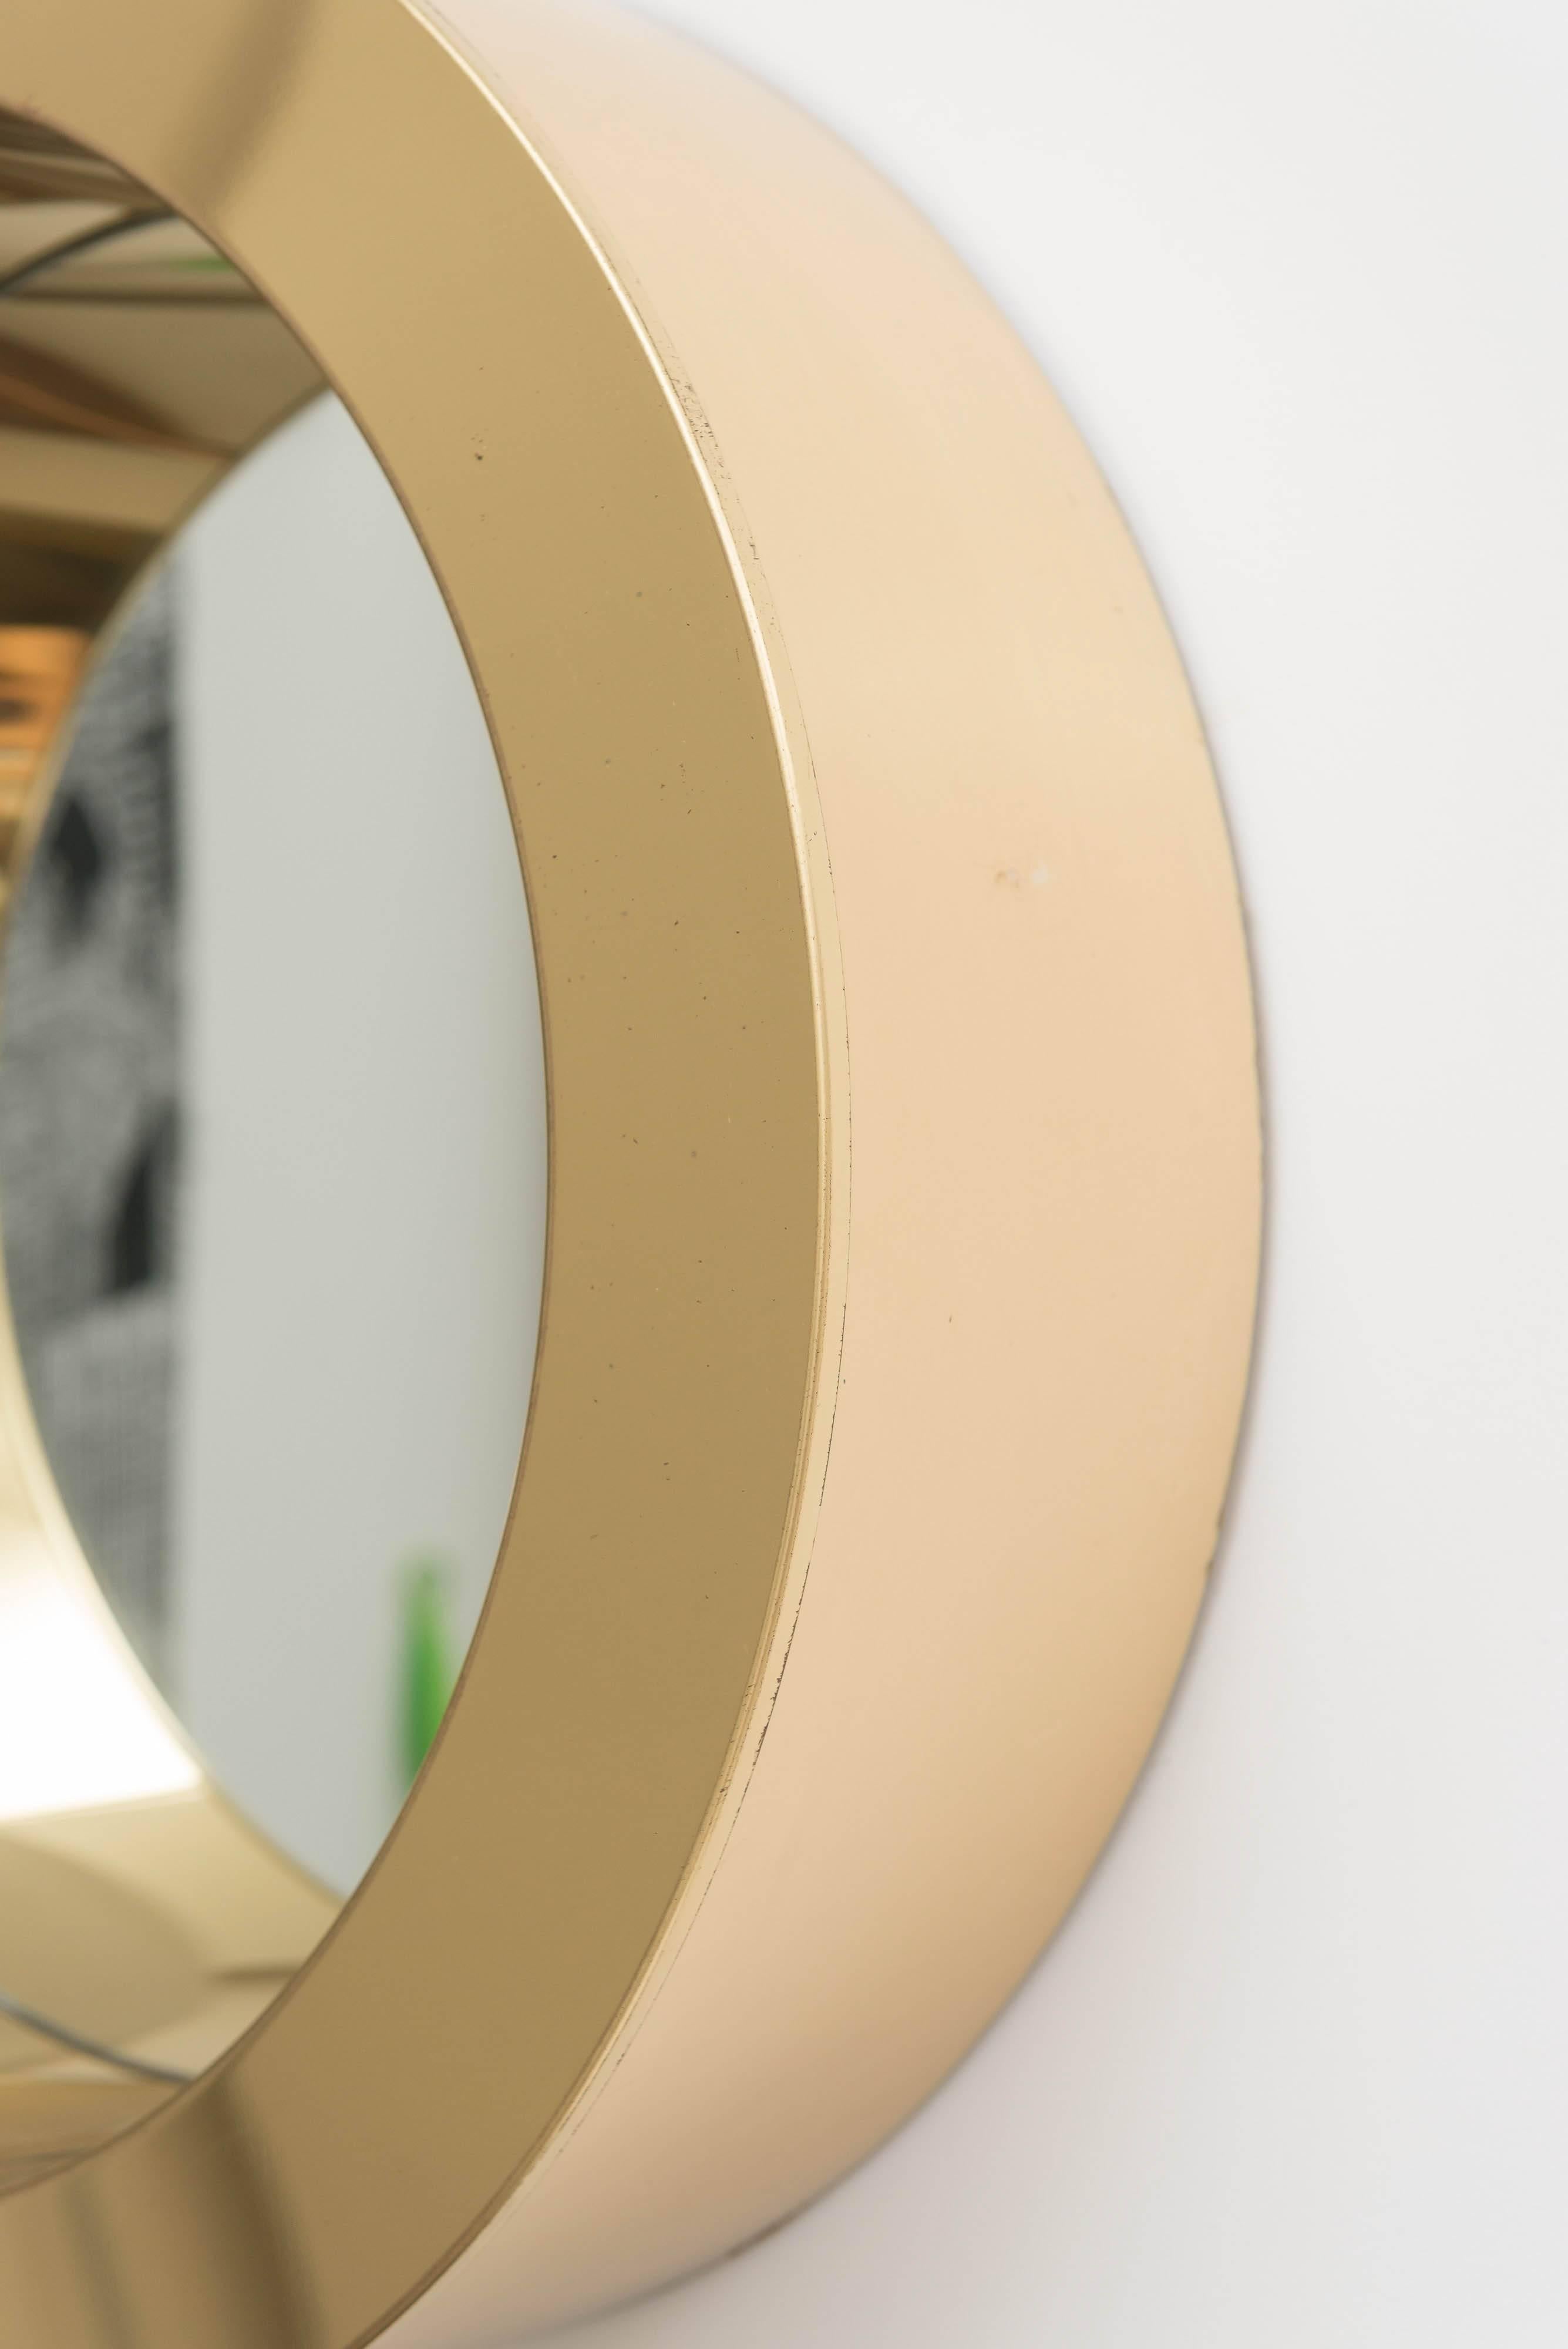 Curtis Jere Brass Porthole Mirror In Excellent Condition In San Francisco, CA